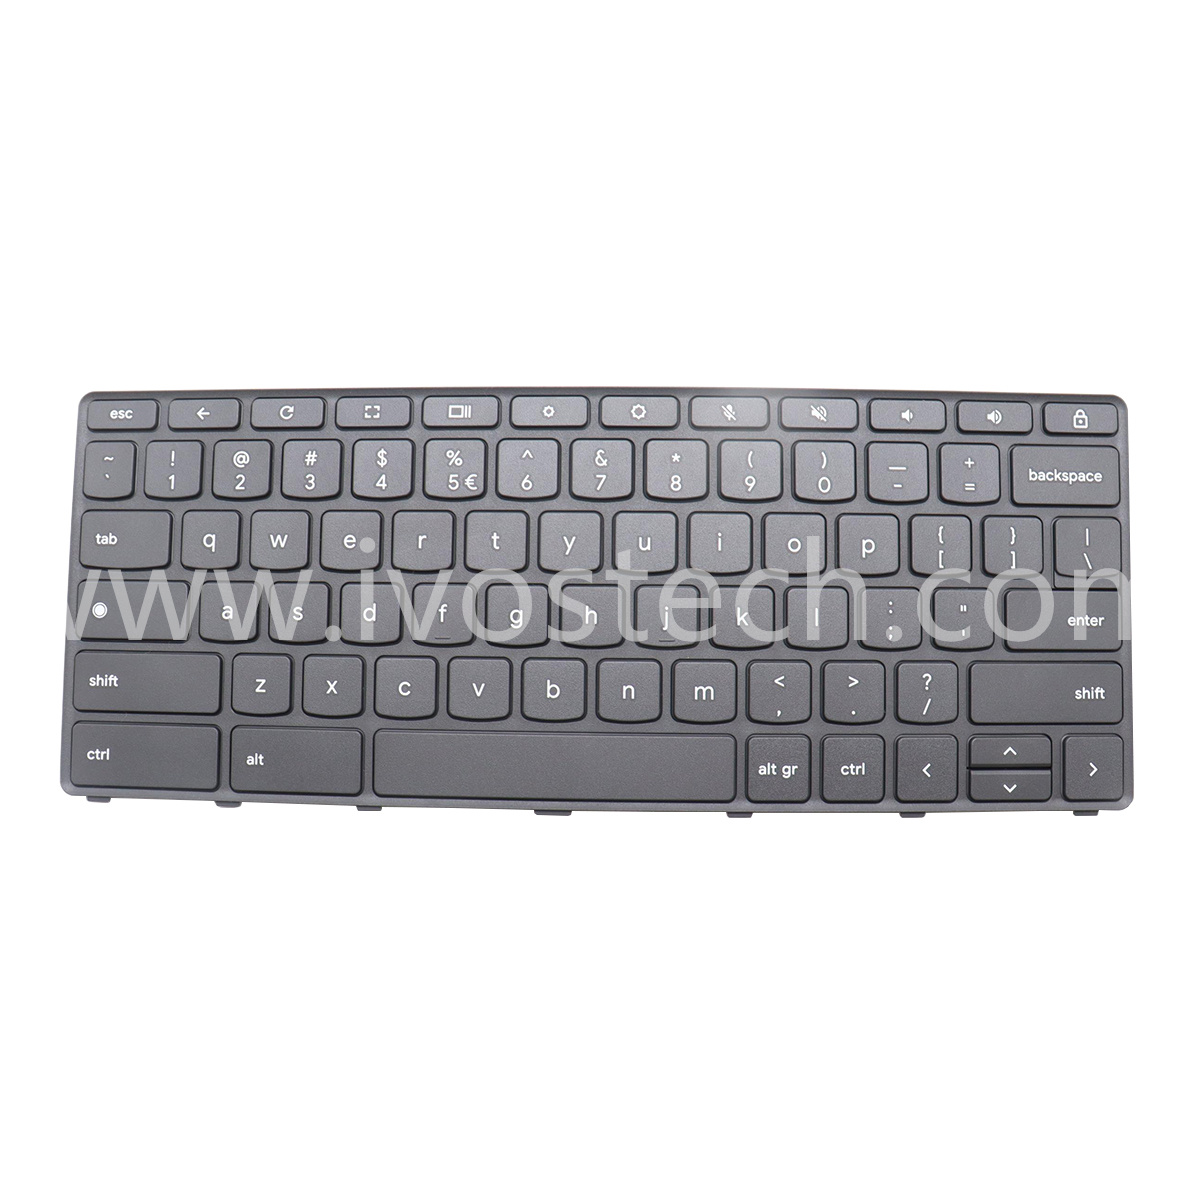 5N21L44082 Laptop Replacement Keyboard US Layout for Lenovo 500e Yoga Chromebook Gen 4 82W4 82W5